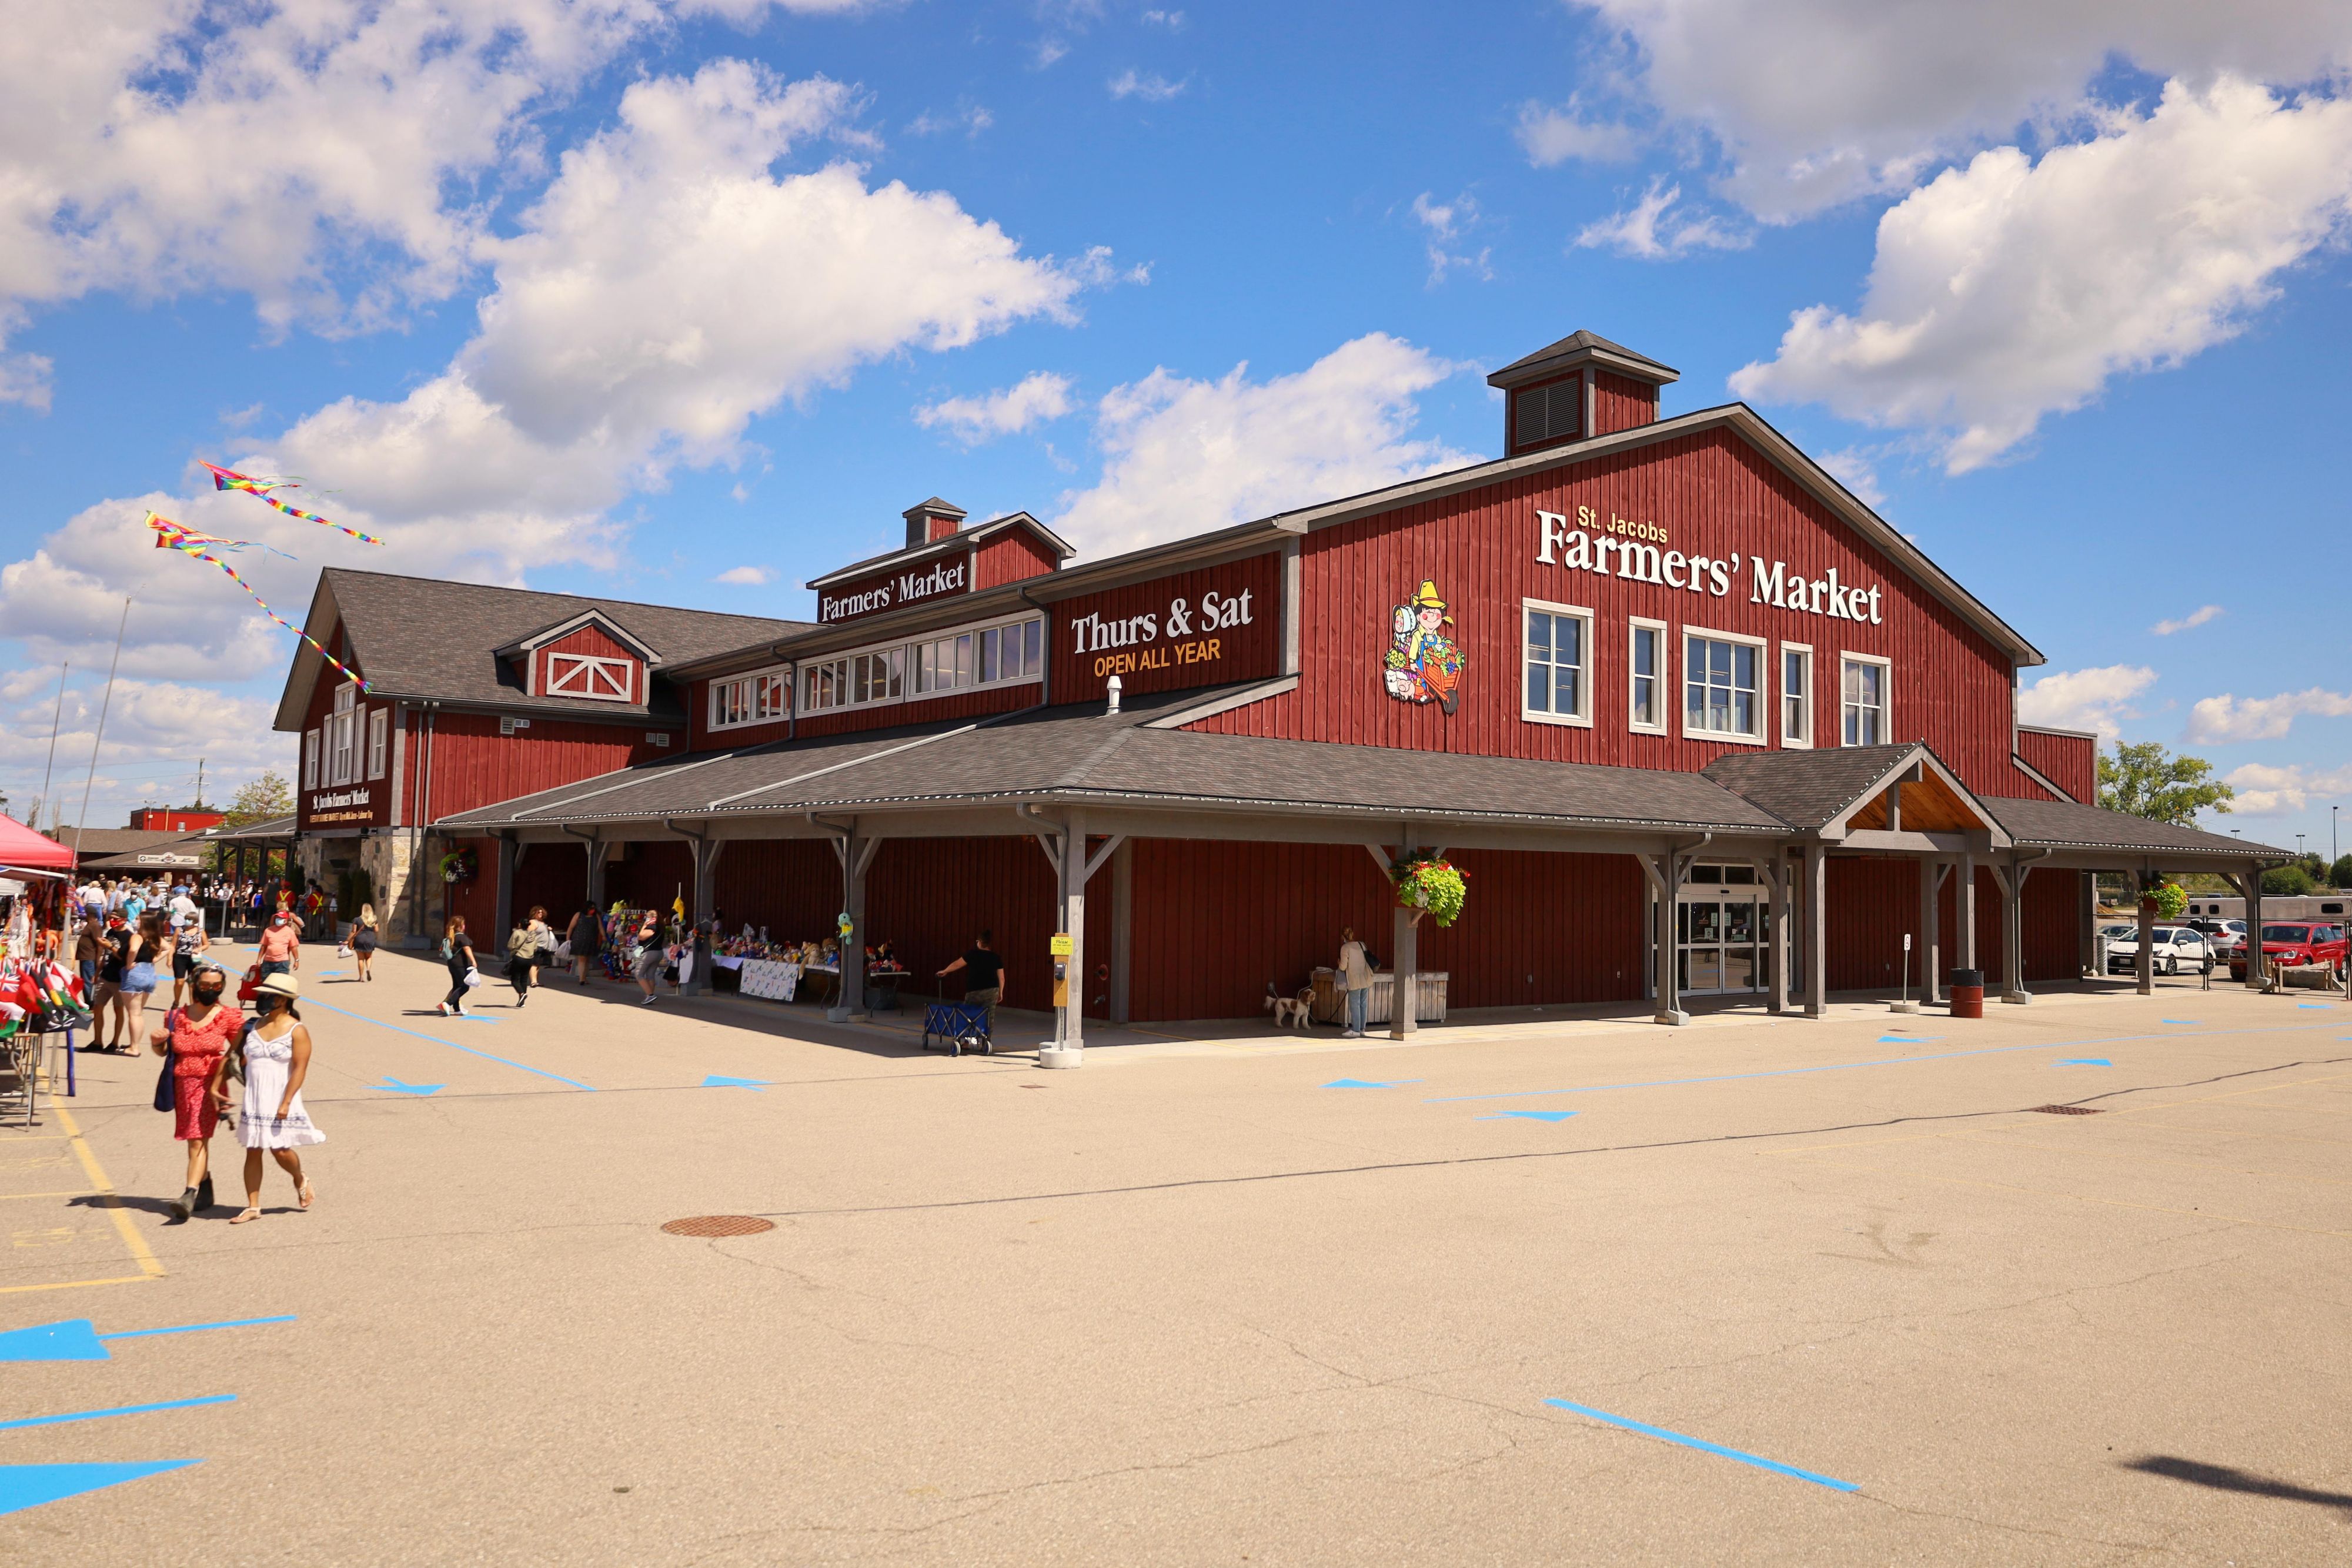 Come visit Canada's Largest Year-Round Farmers Market